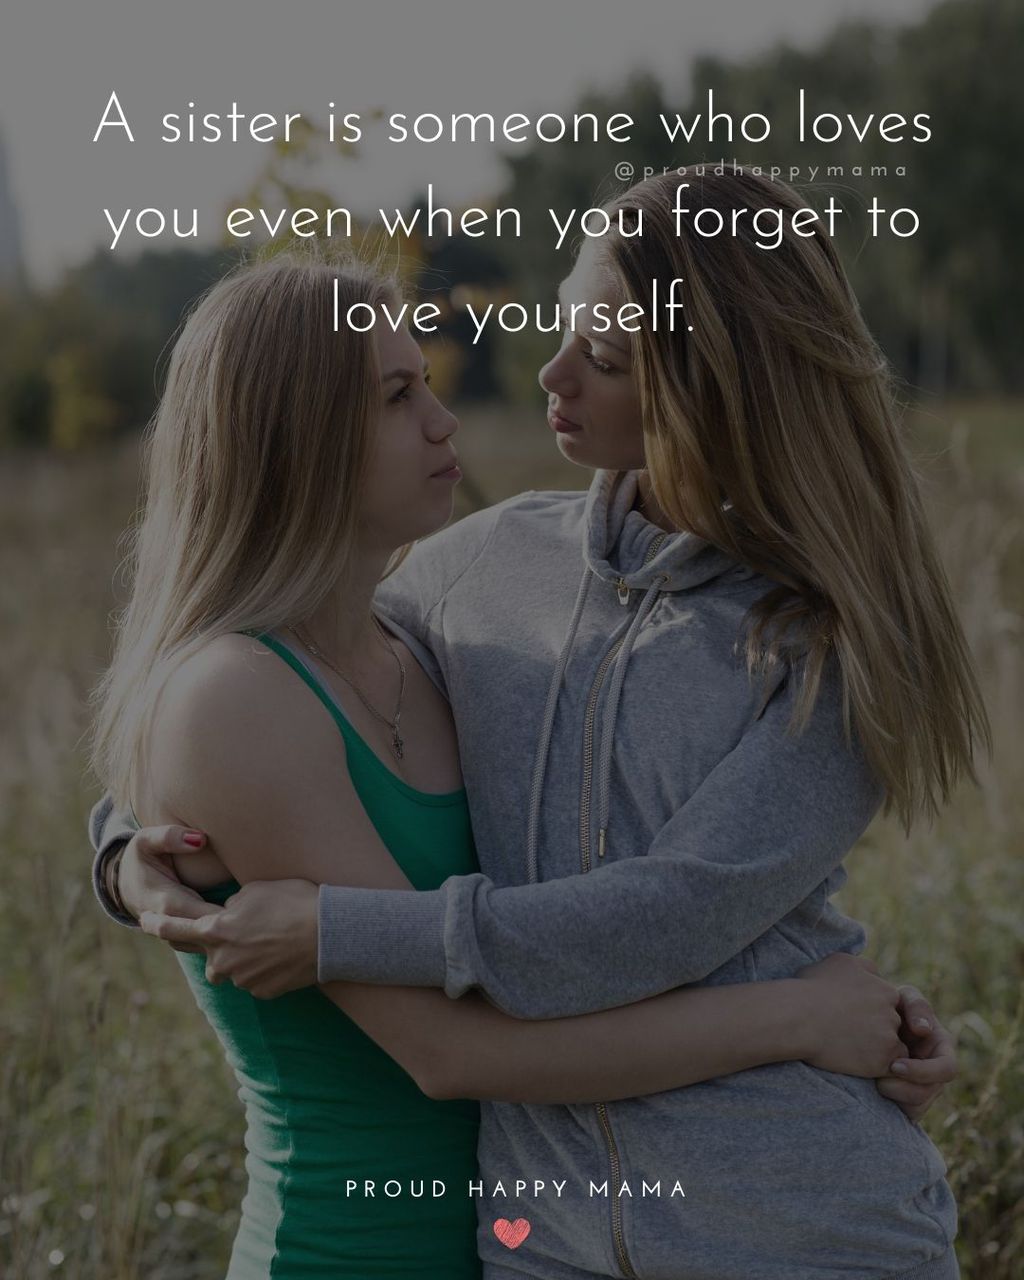 Sister Quotes - A sister is someone who loves you even when you forget to love yourself.